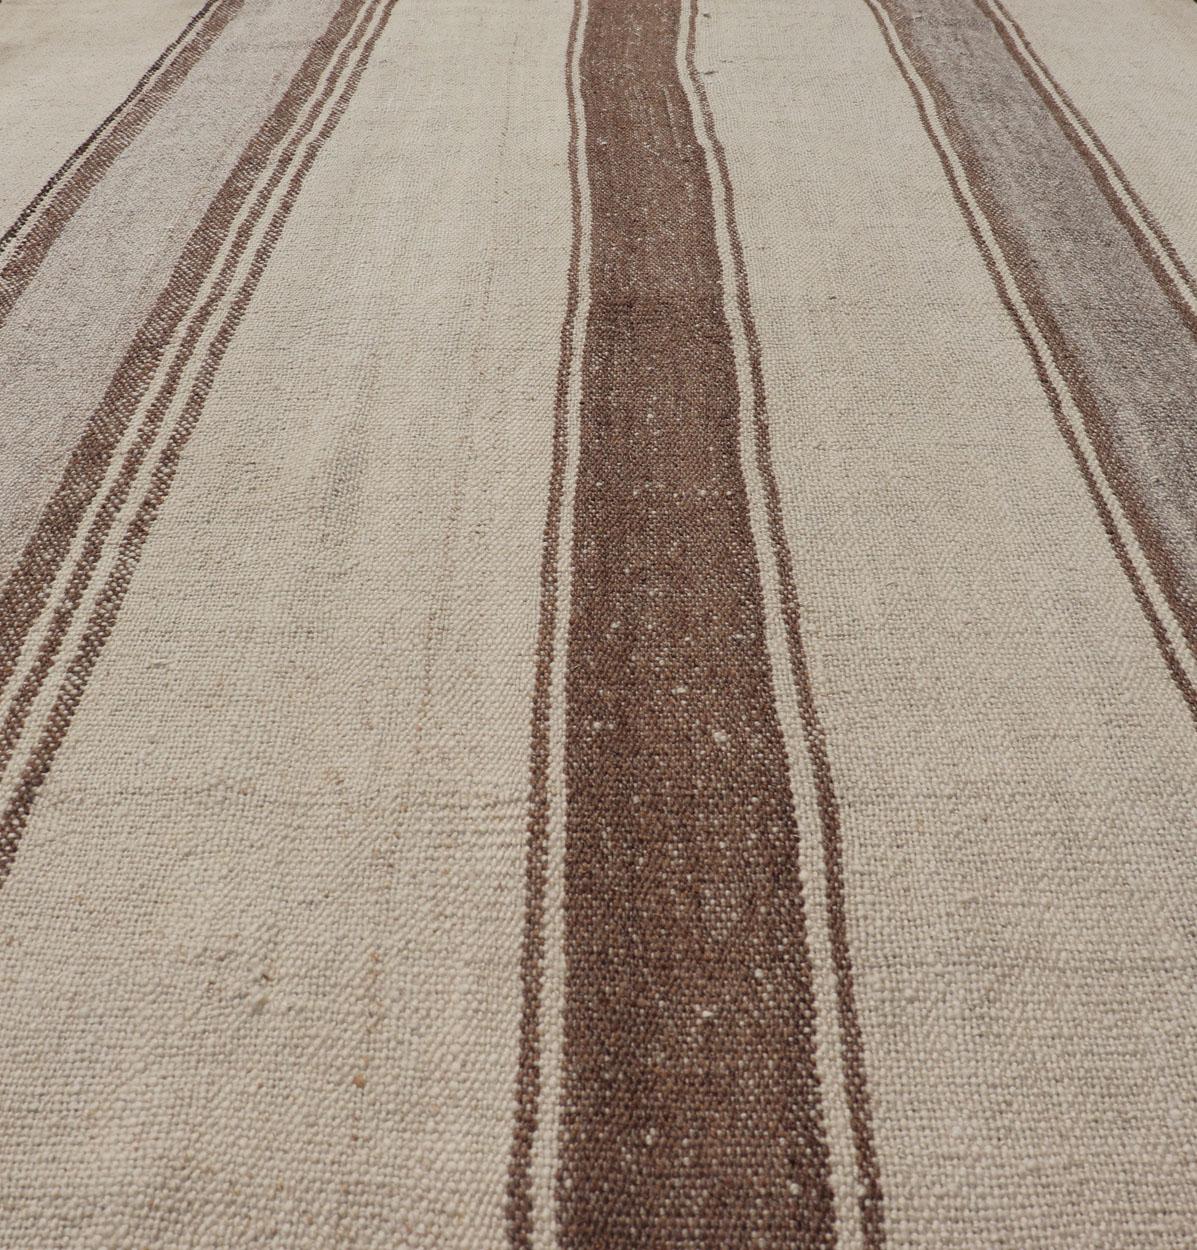 Vintage Turkish Kilim with Vertical Stripes in Tan, Taupe, Grey, Cream and Brown In Excellent Condition For Sale In Atlanta, GA